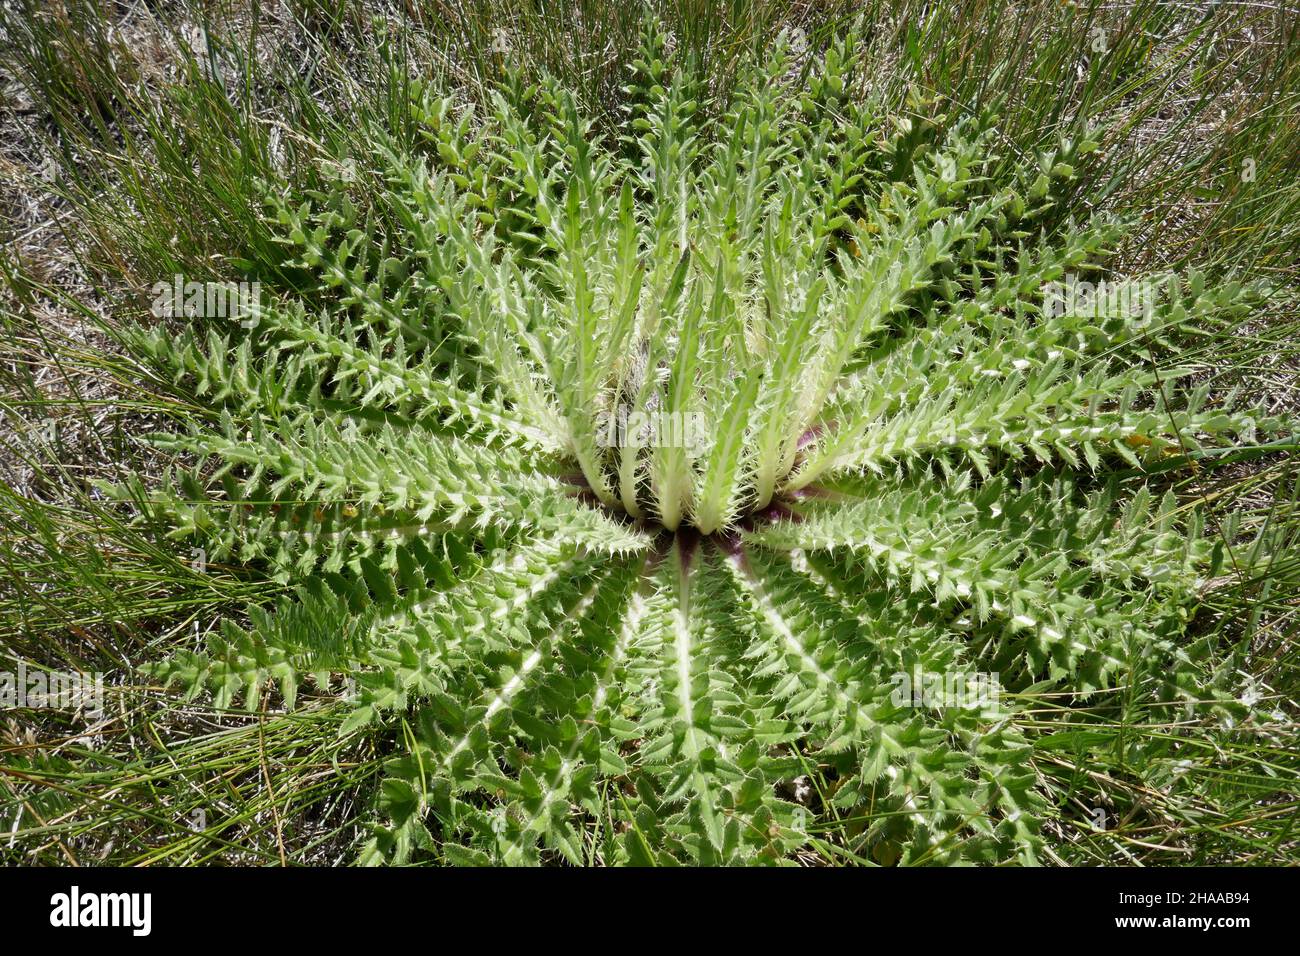 Wild plant prickly leaves photography images Alamy